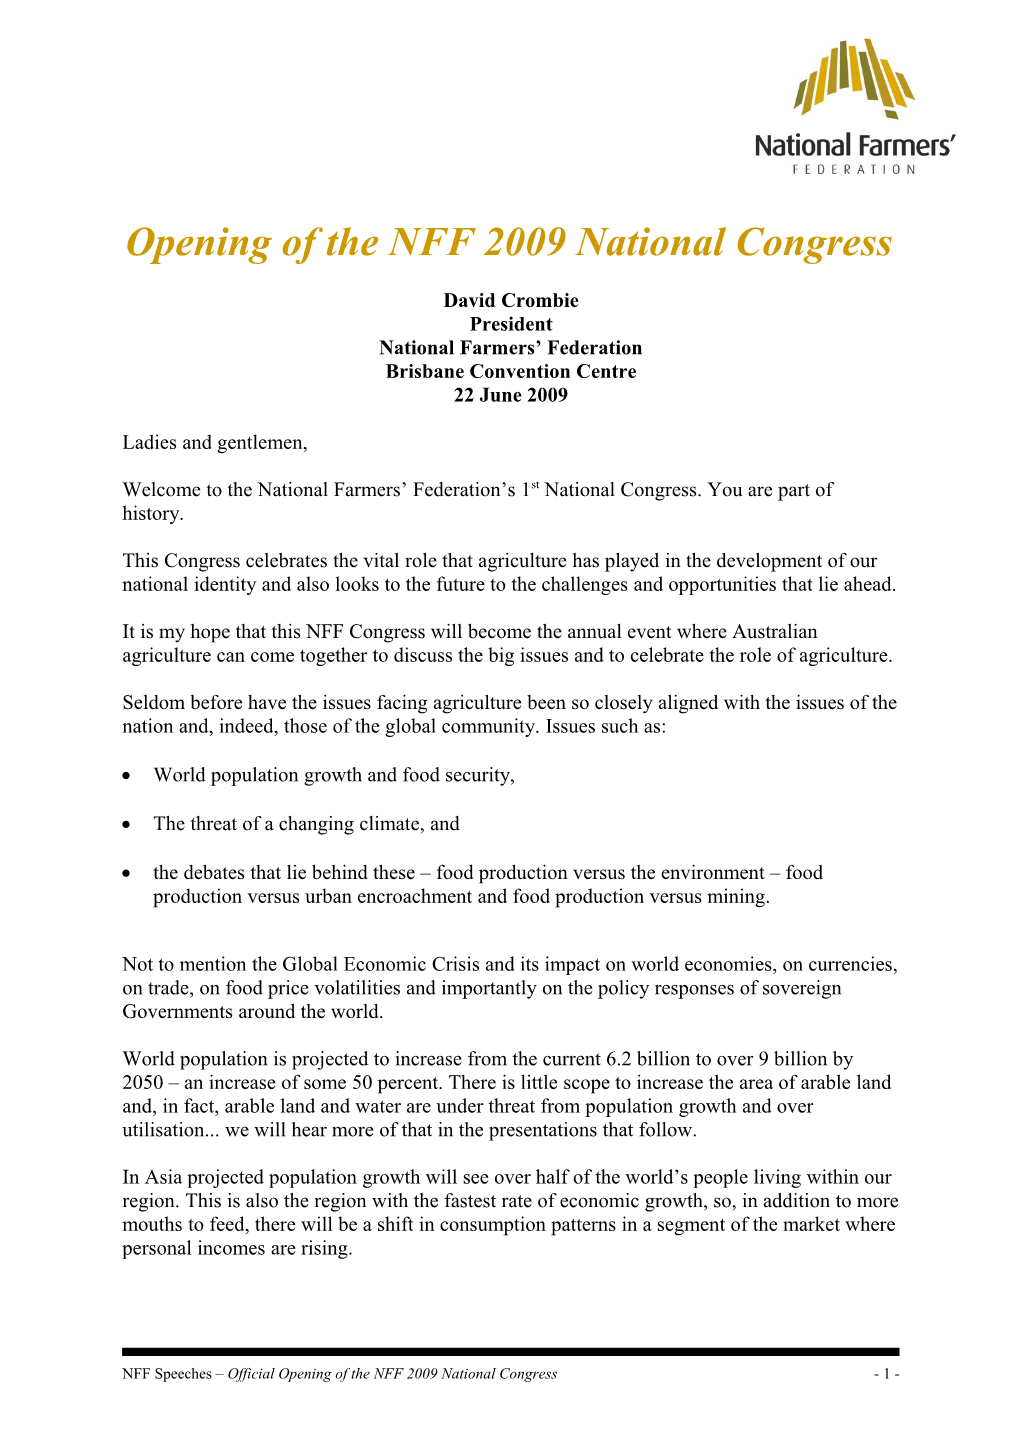 Opening of the NFF 2009 National Congress